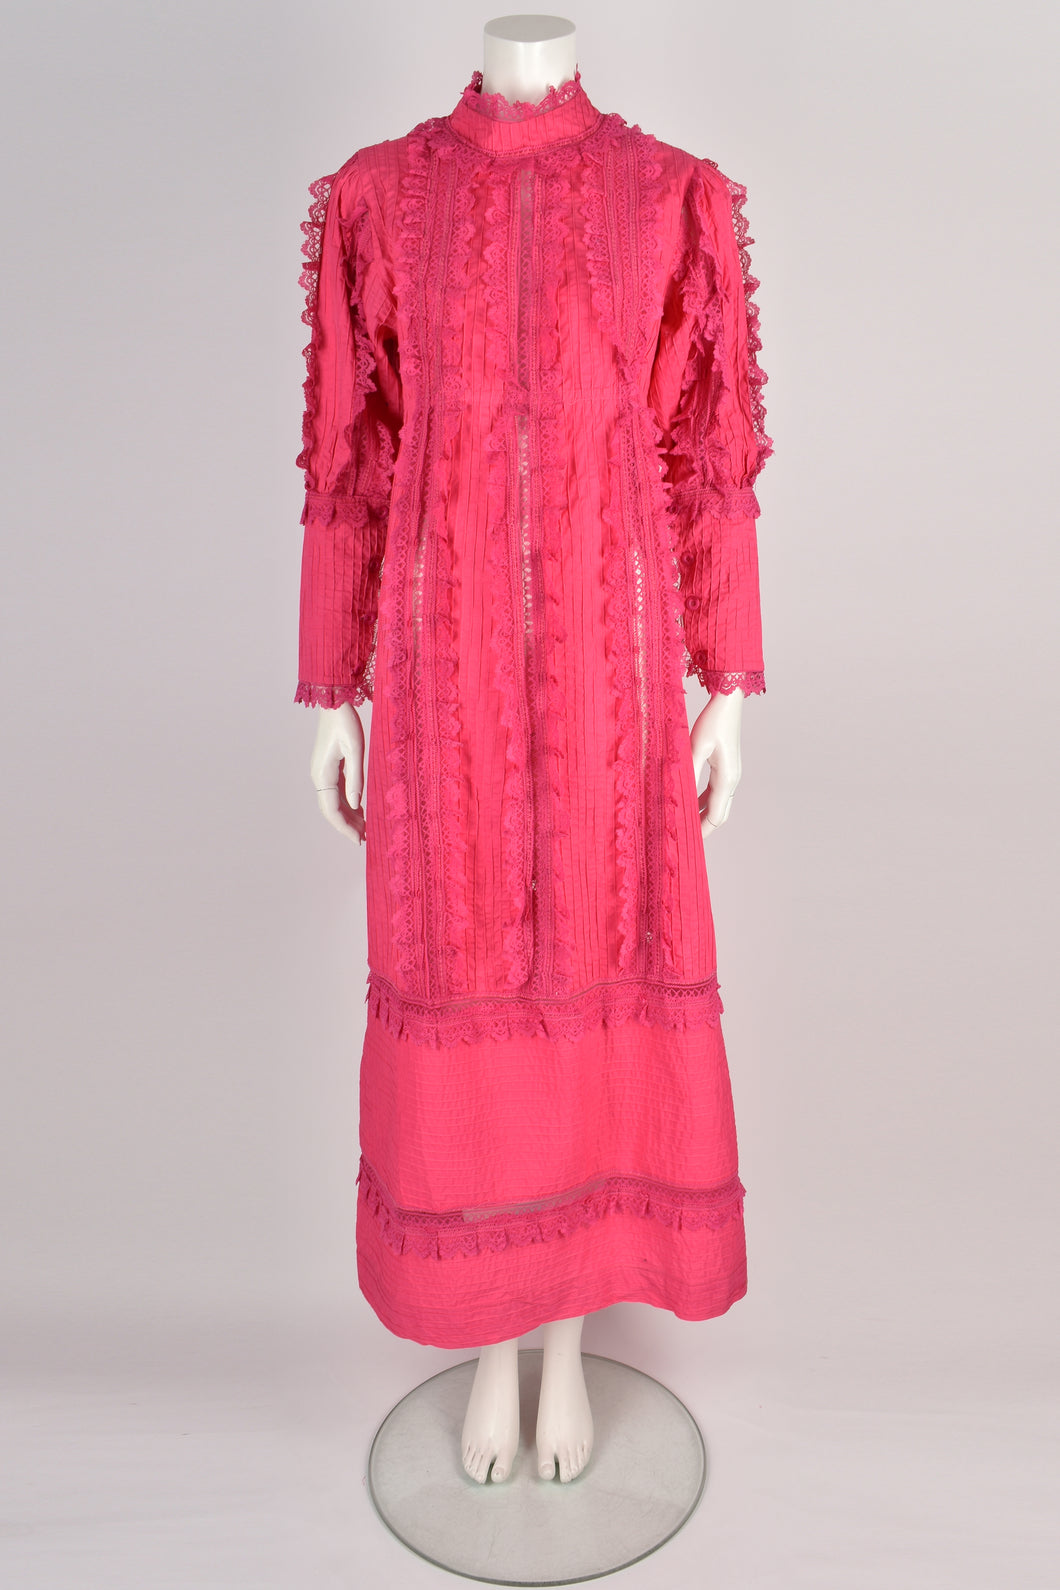 VINTAGE 70s bright pink Mexican dress L